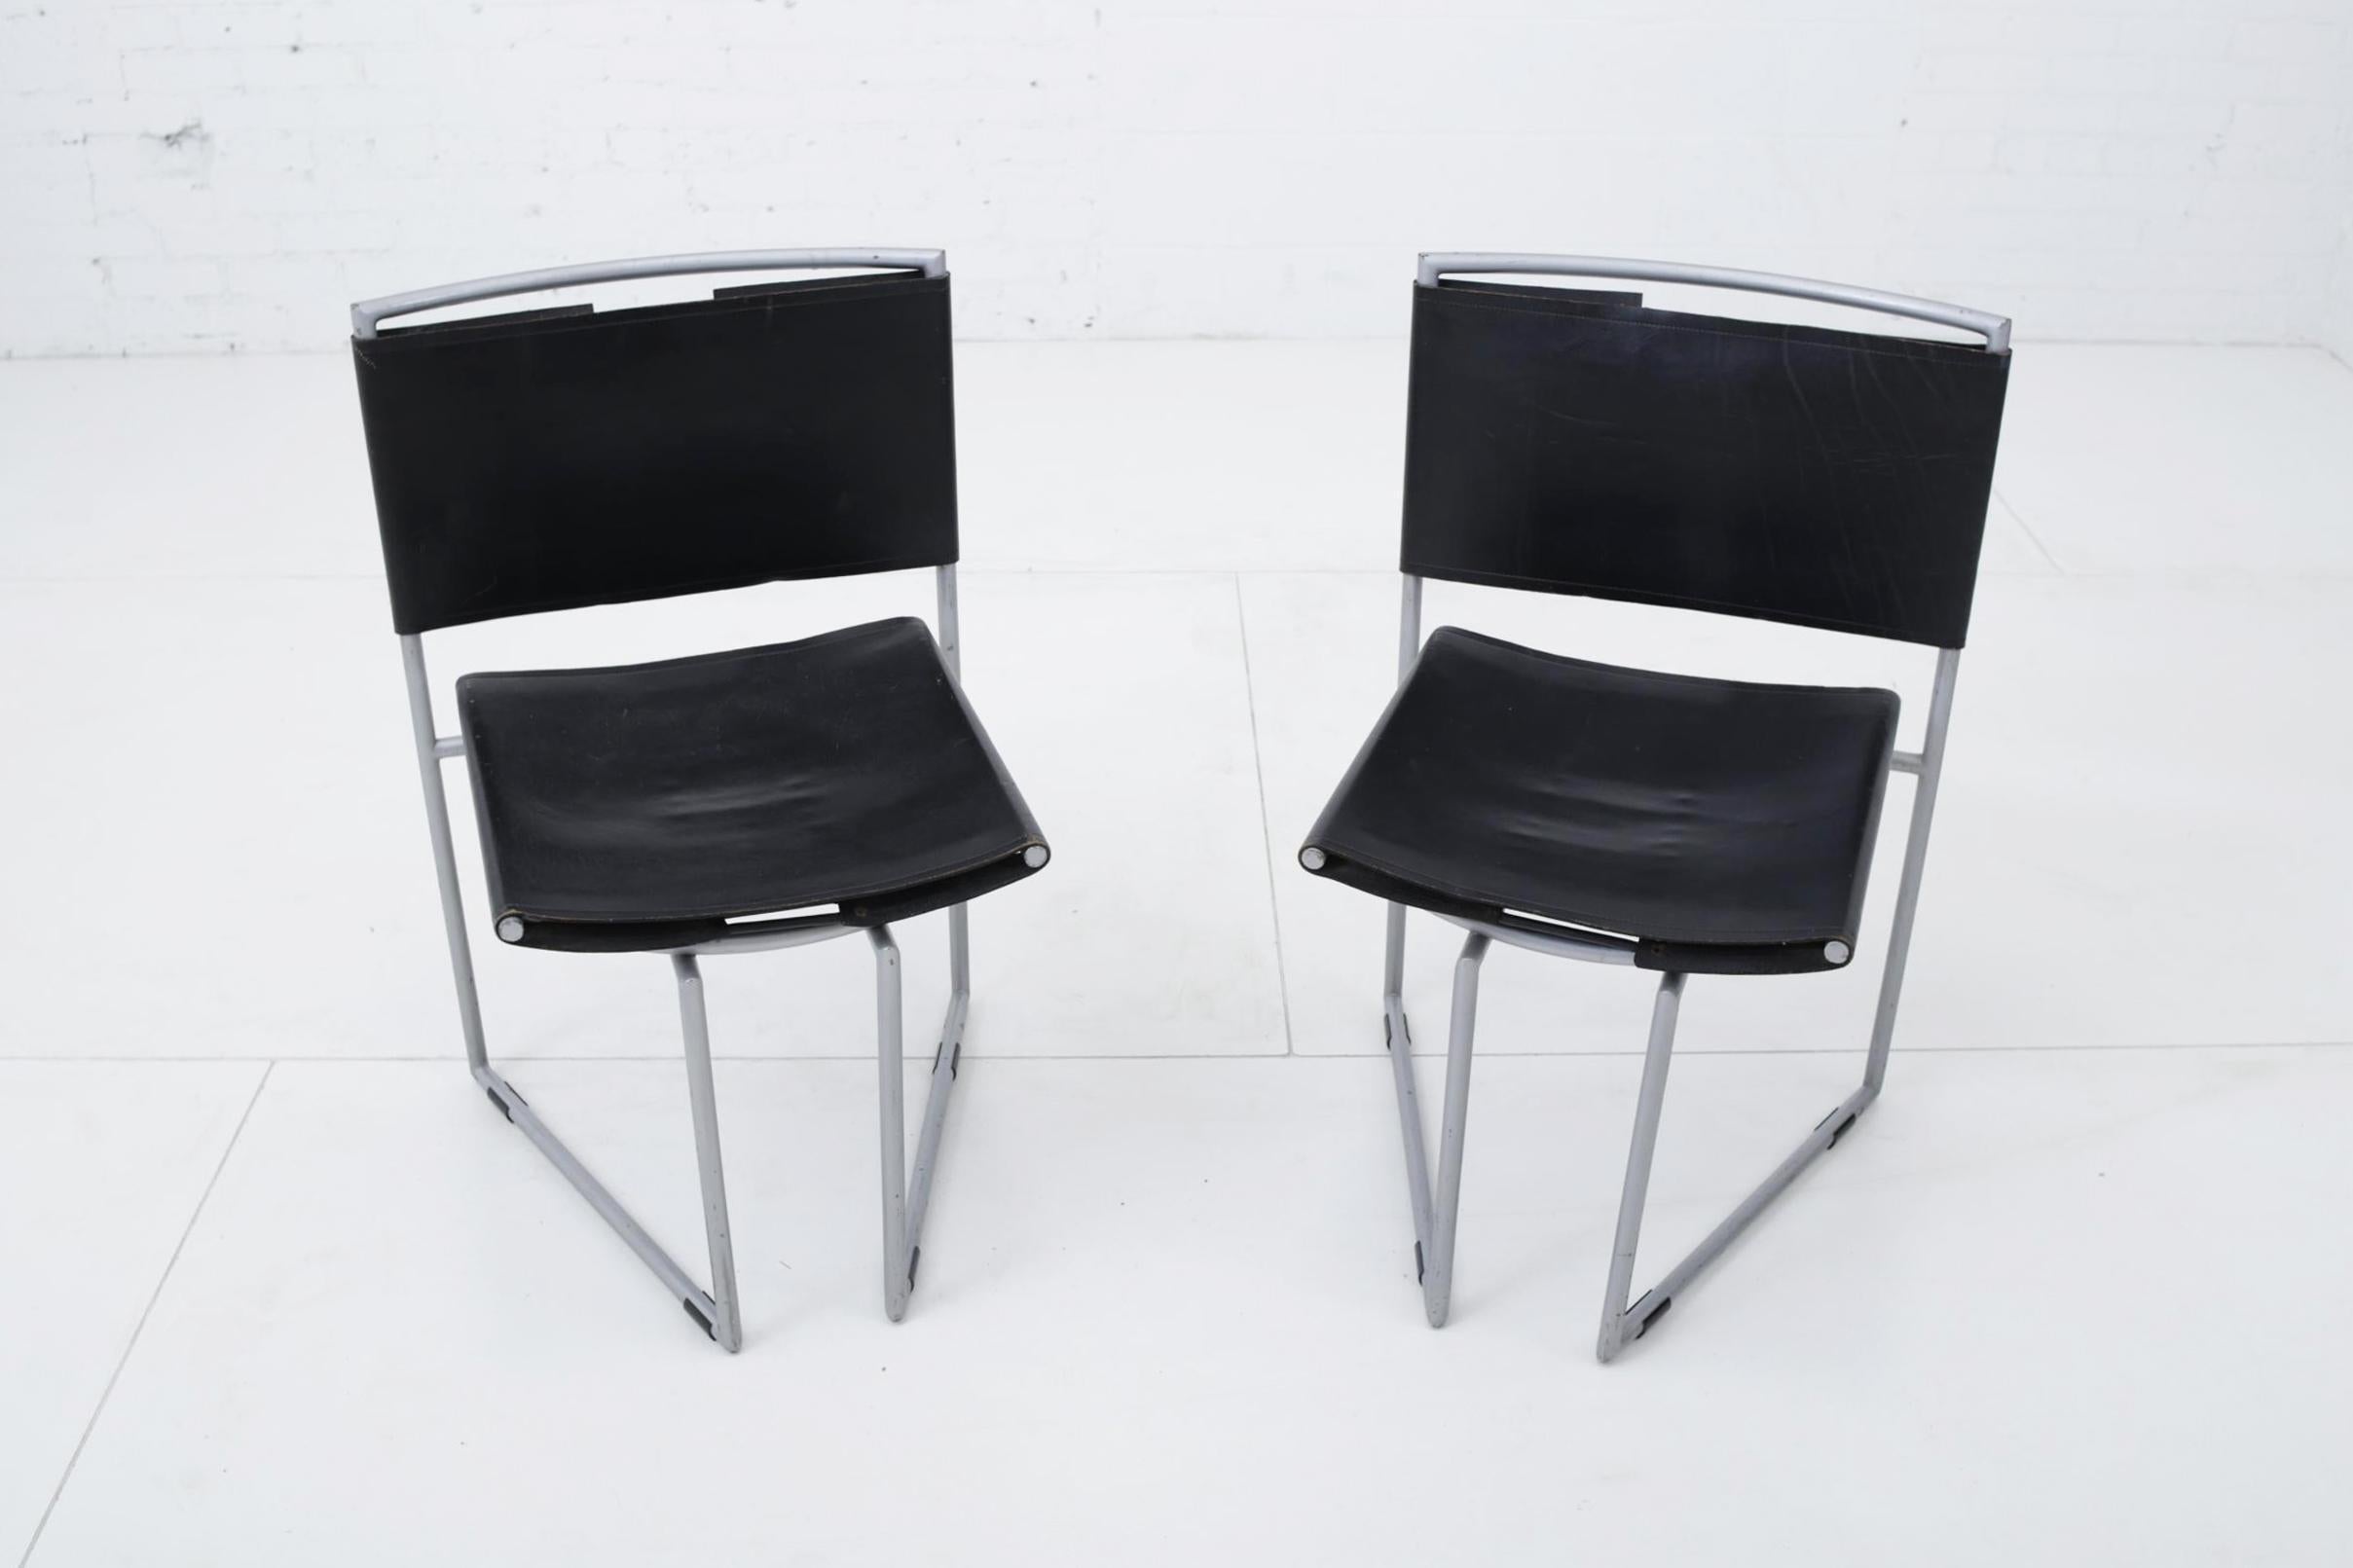 Botta 91 chairs set of 6 by Mario Botta for Alias, 1991. Gray enameled steel frames with black leather sling seat and back. Made in Italy.